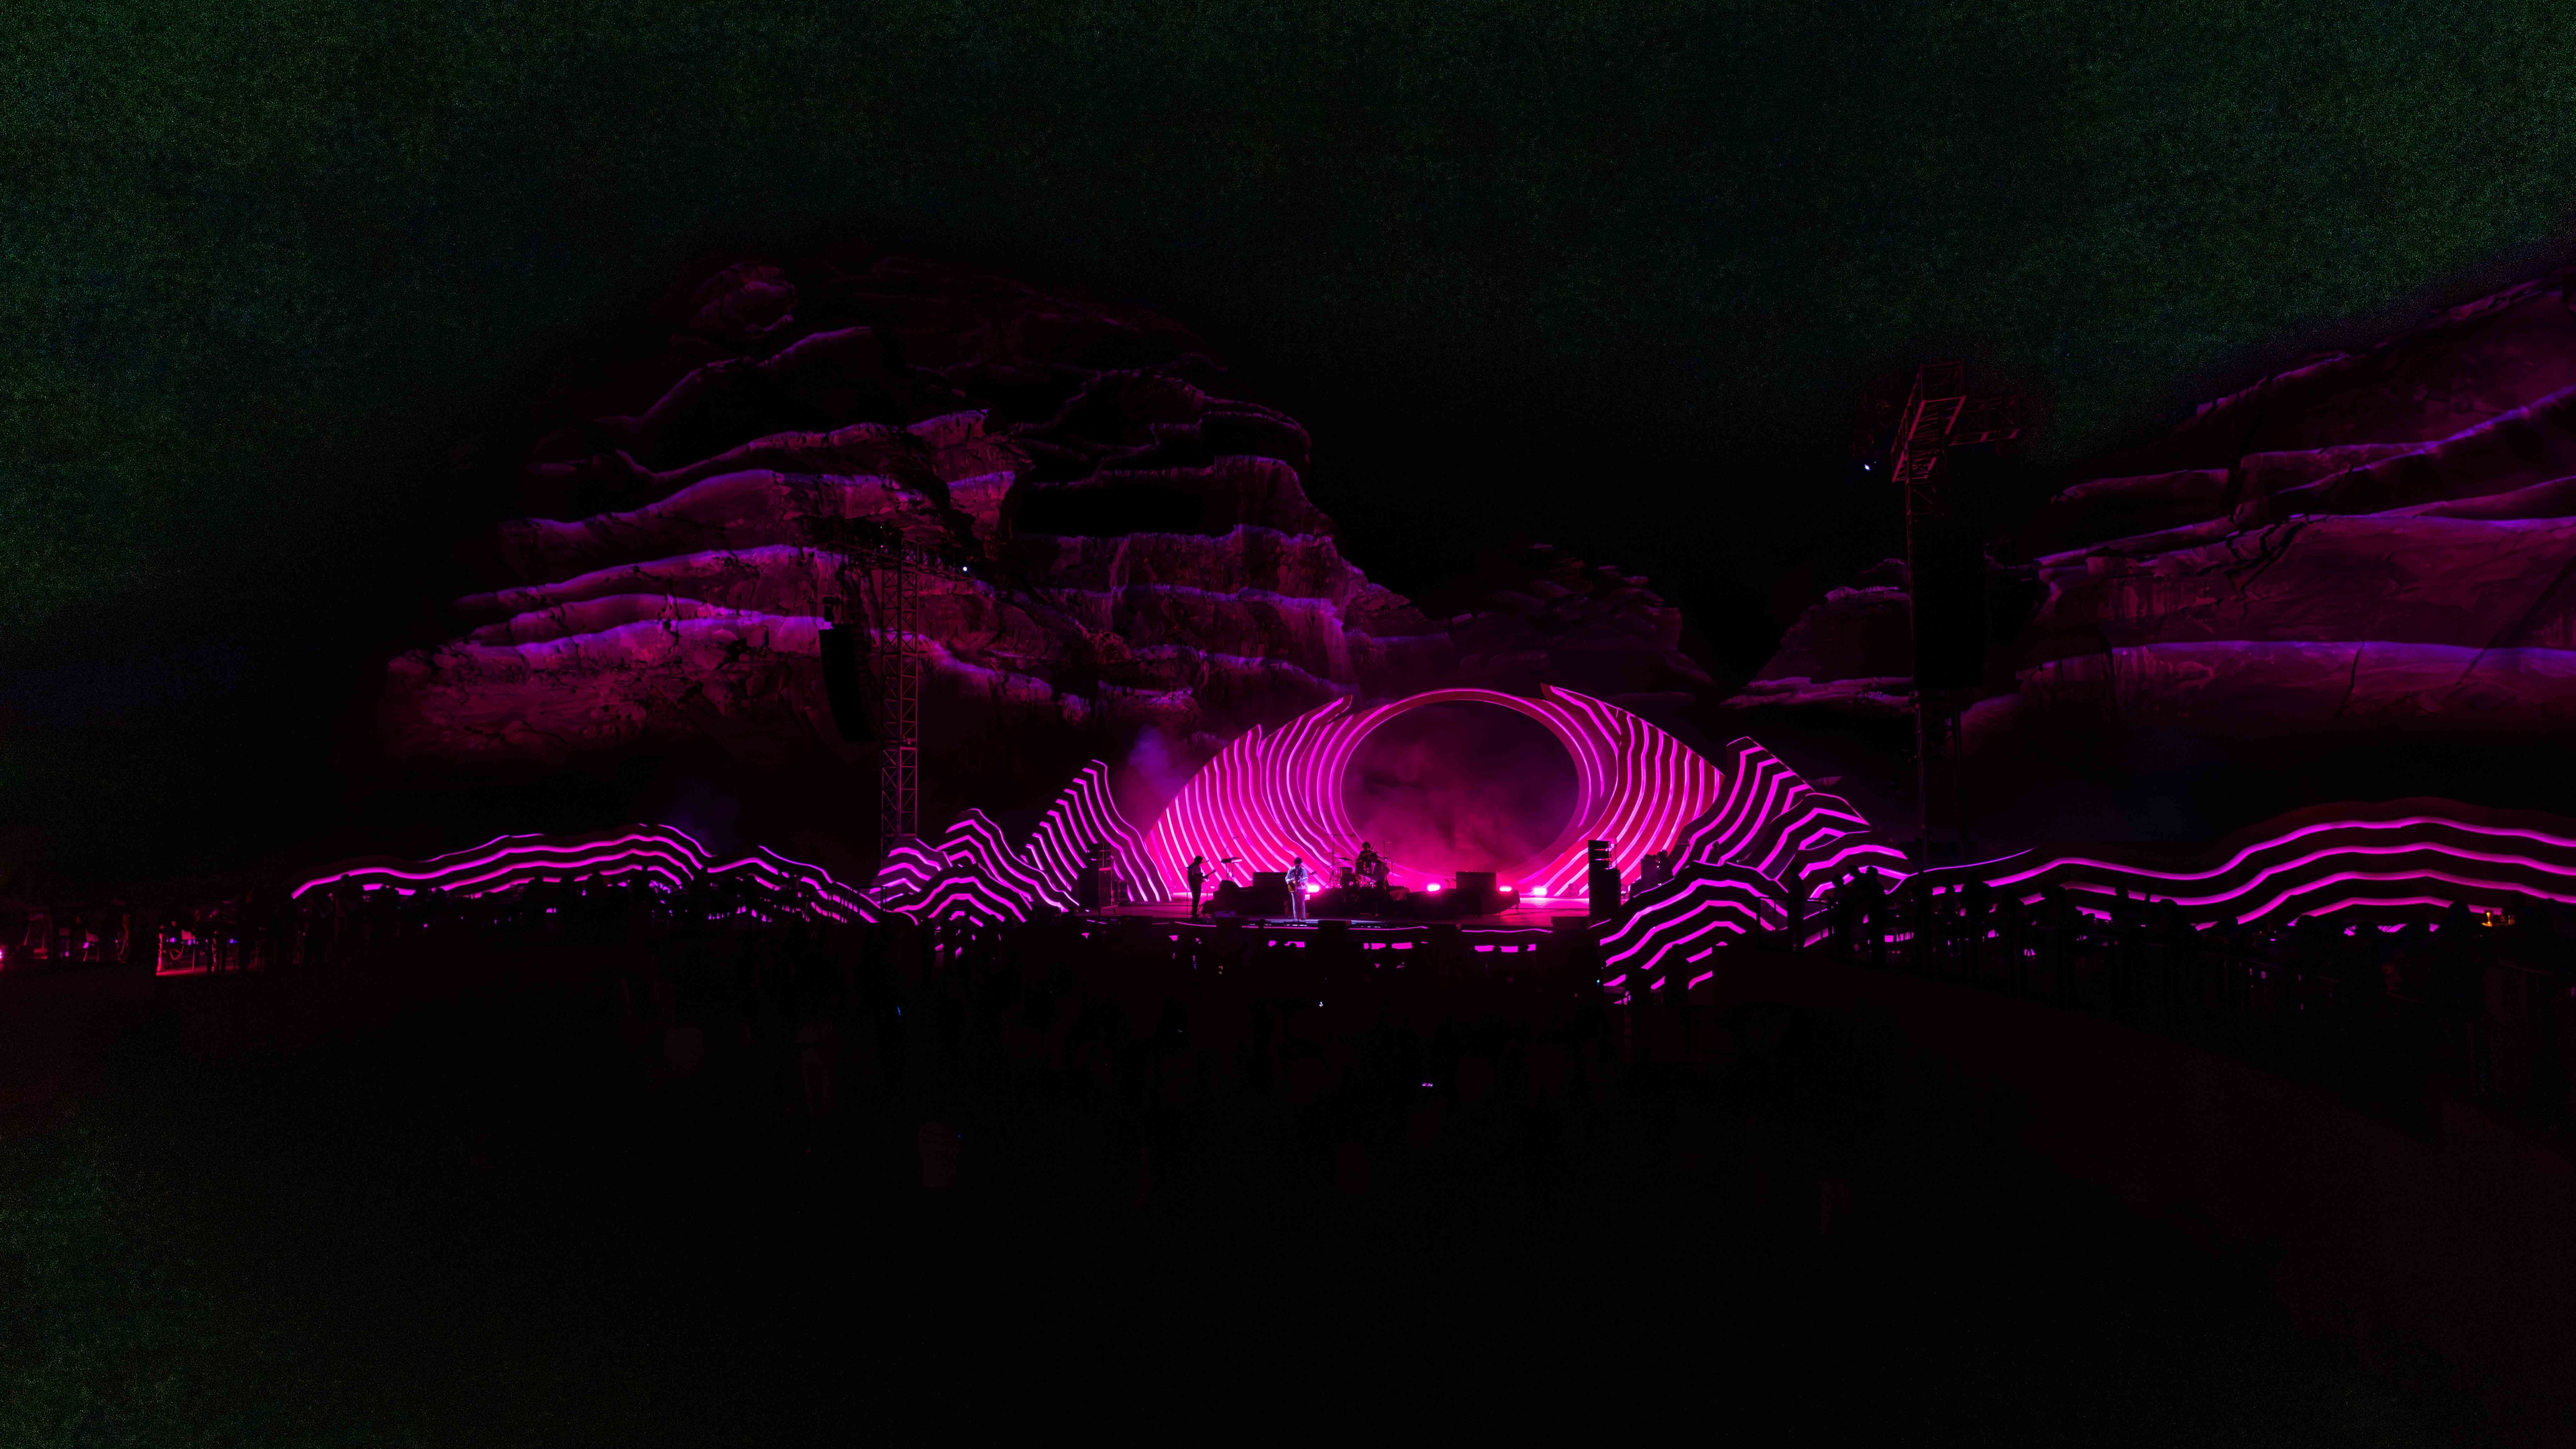 Night festival stage with pink lighting and rocky background